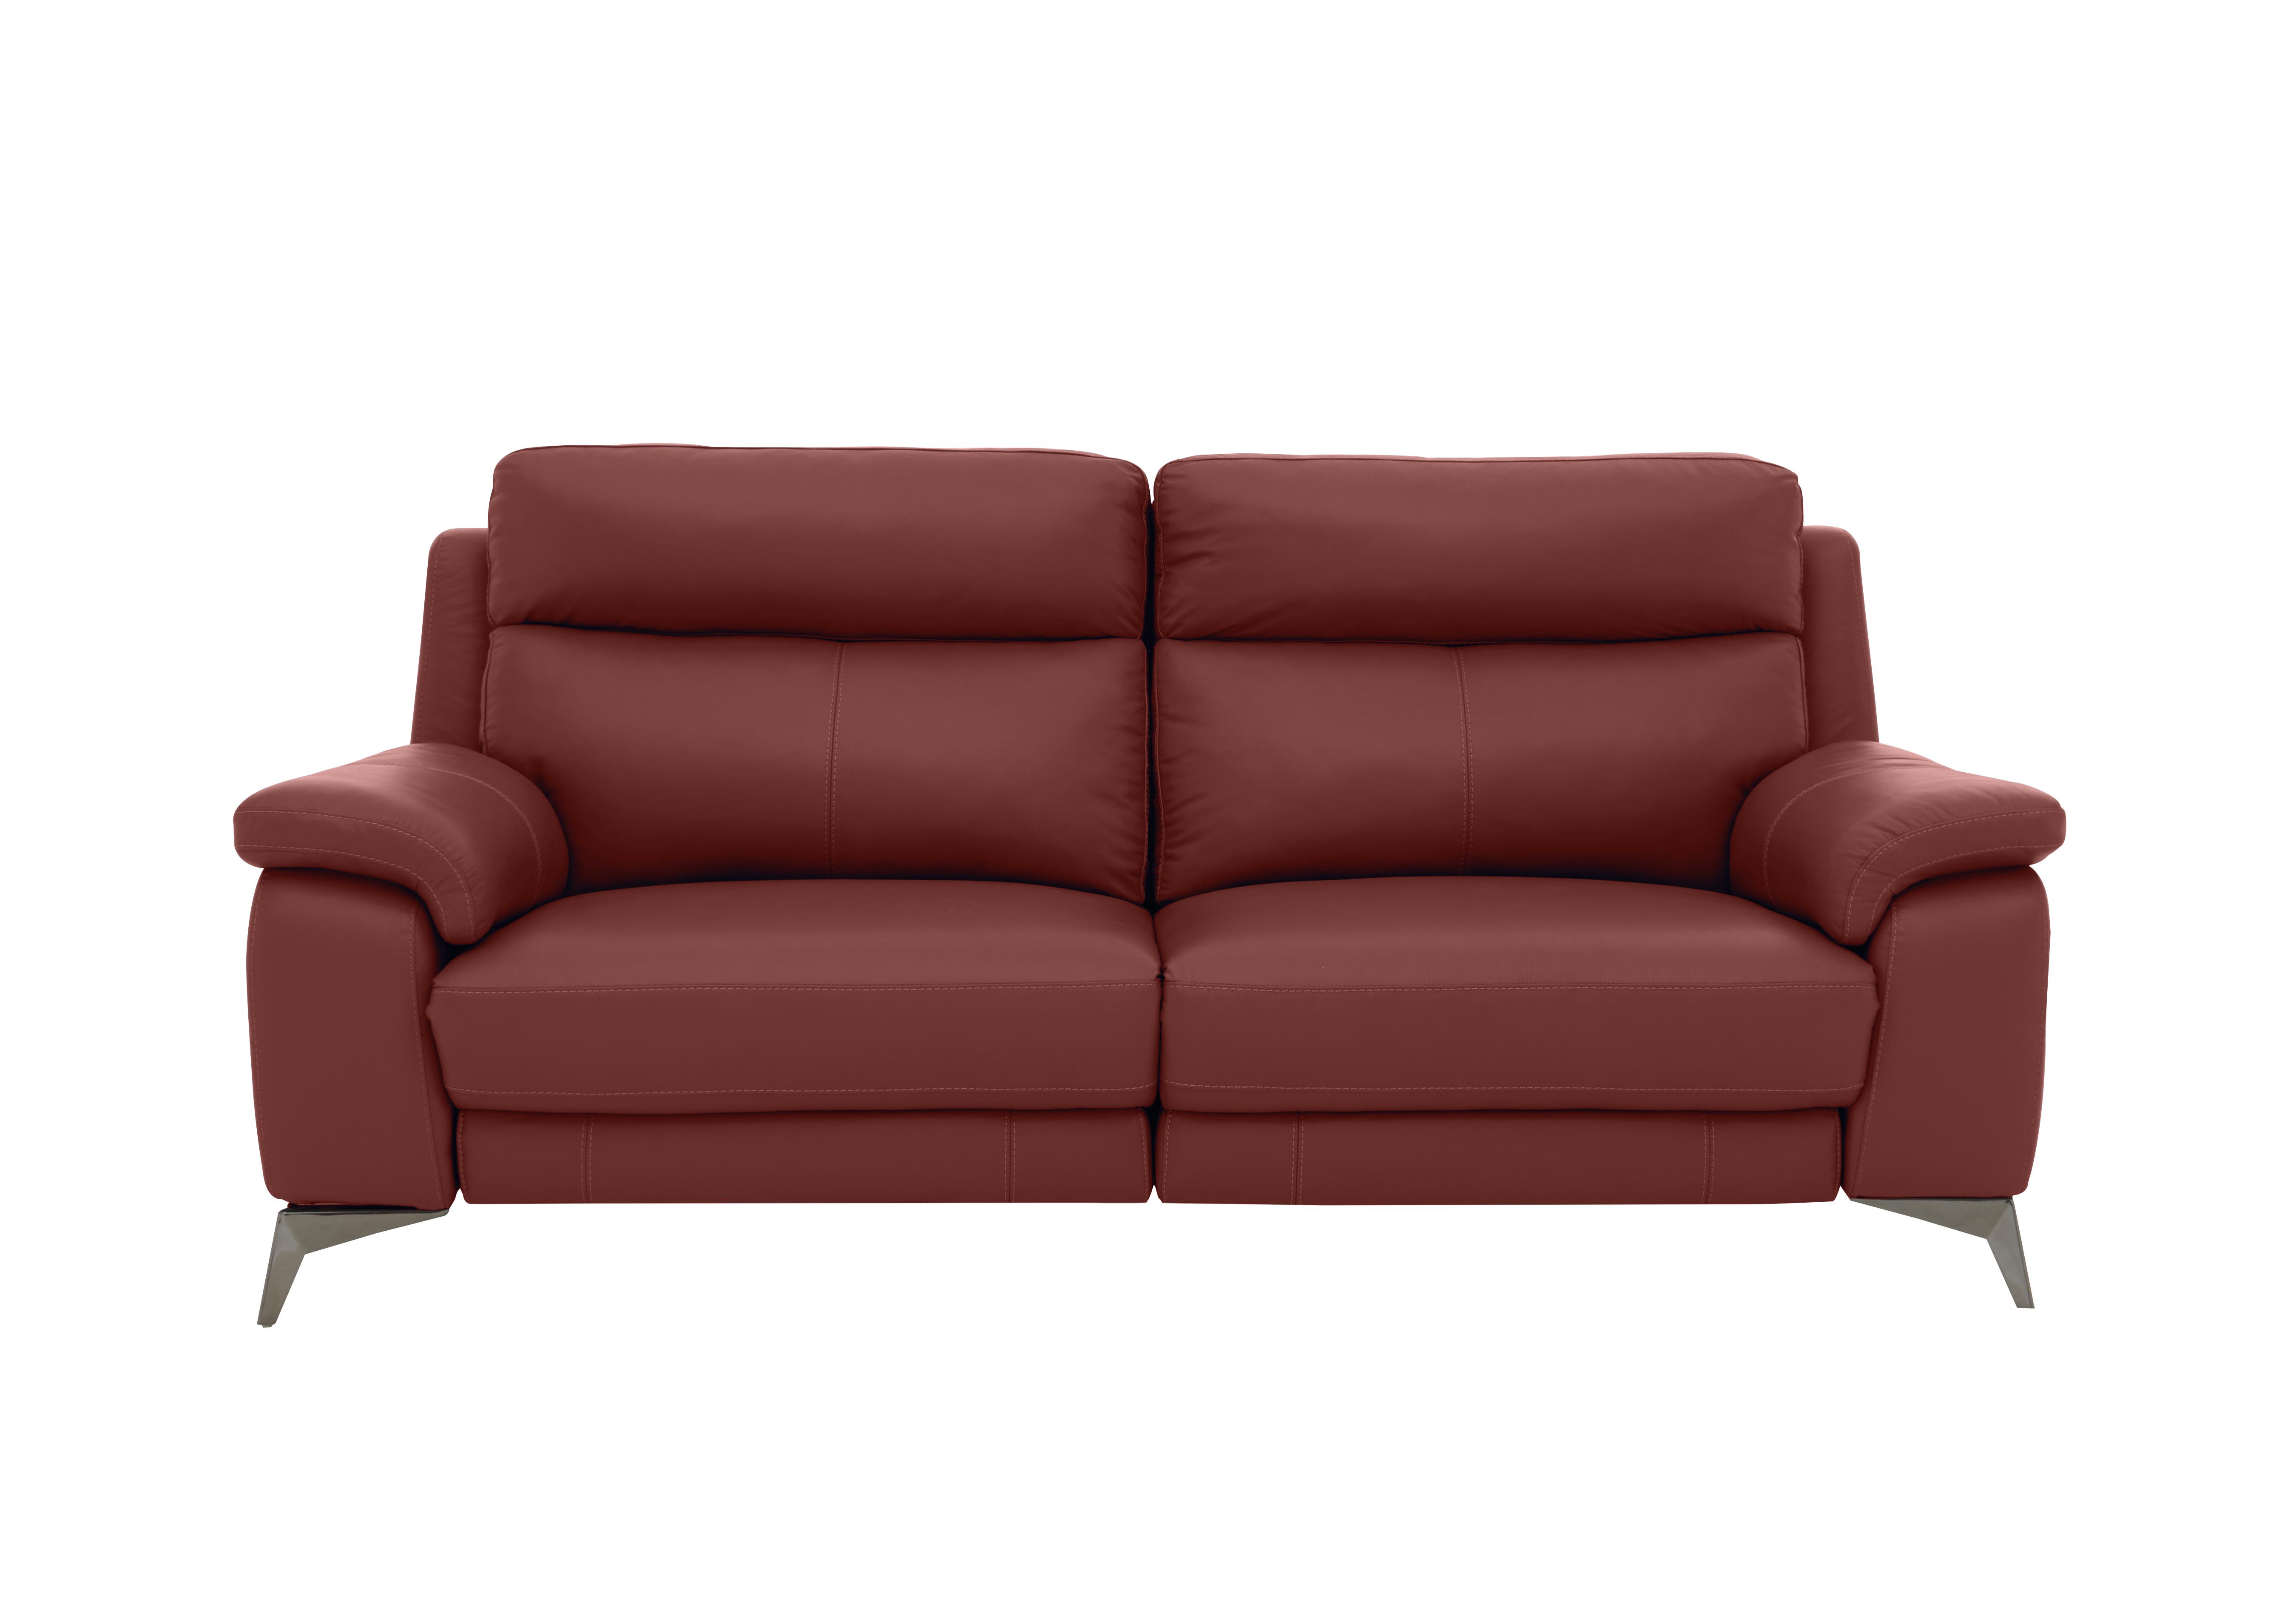 Missouri 3 Seater Leather Recliner Sofa with Power Headrest in Bv-035c Deep Red on Furniture Village